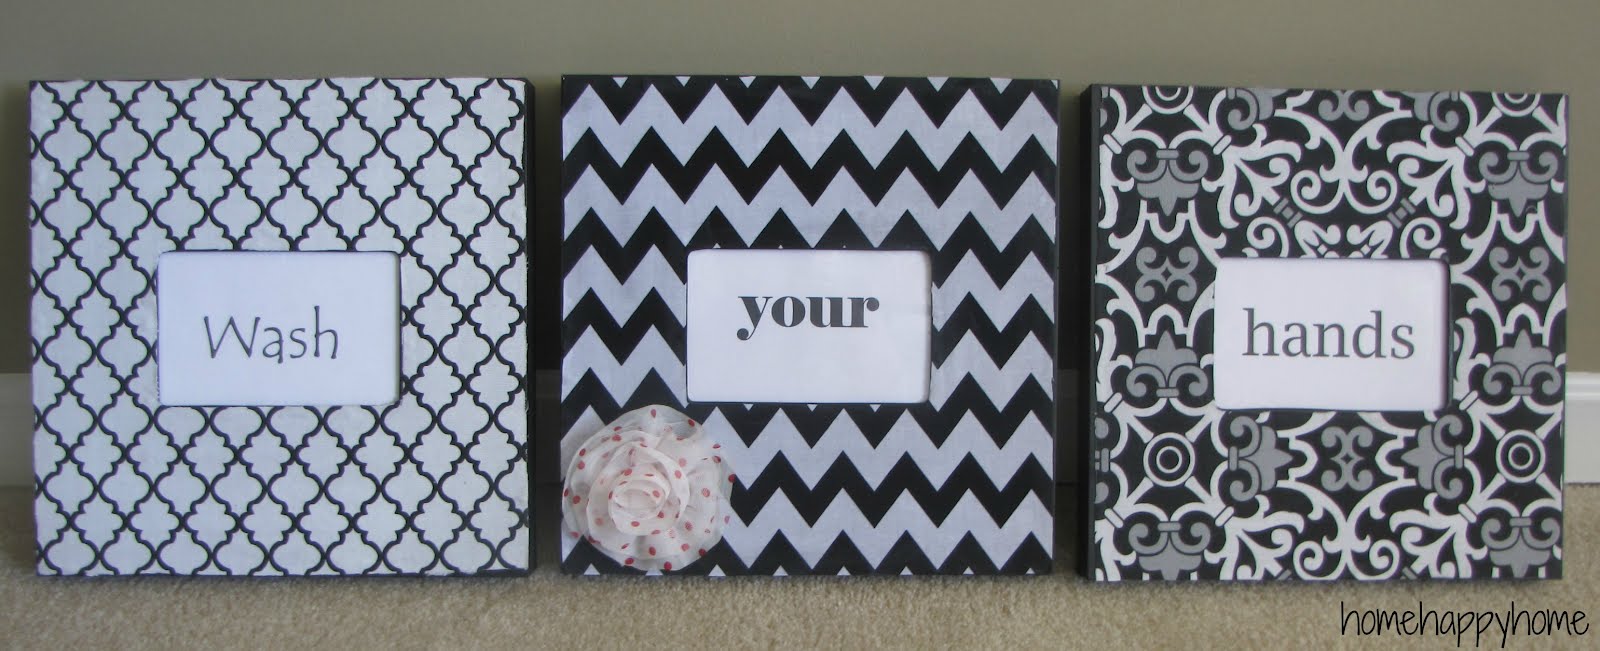 home happy home: Fabric covered frames